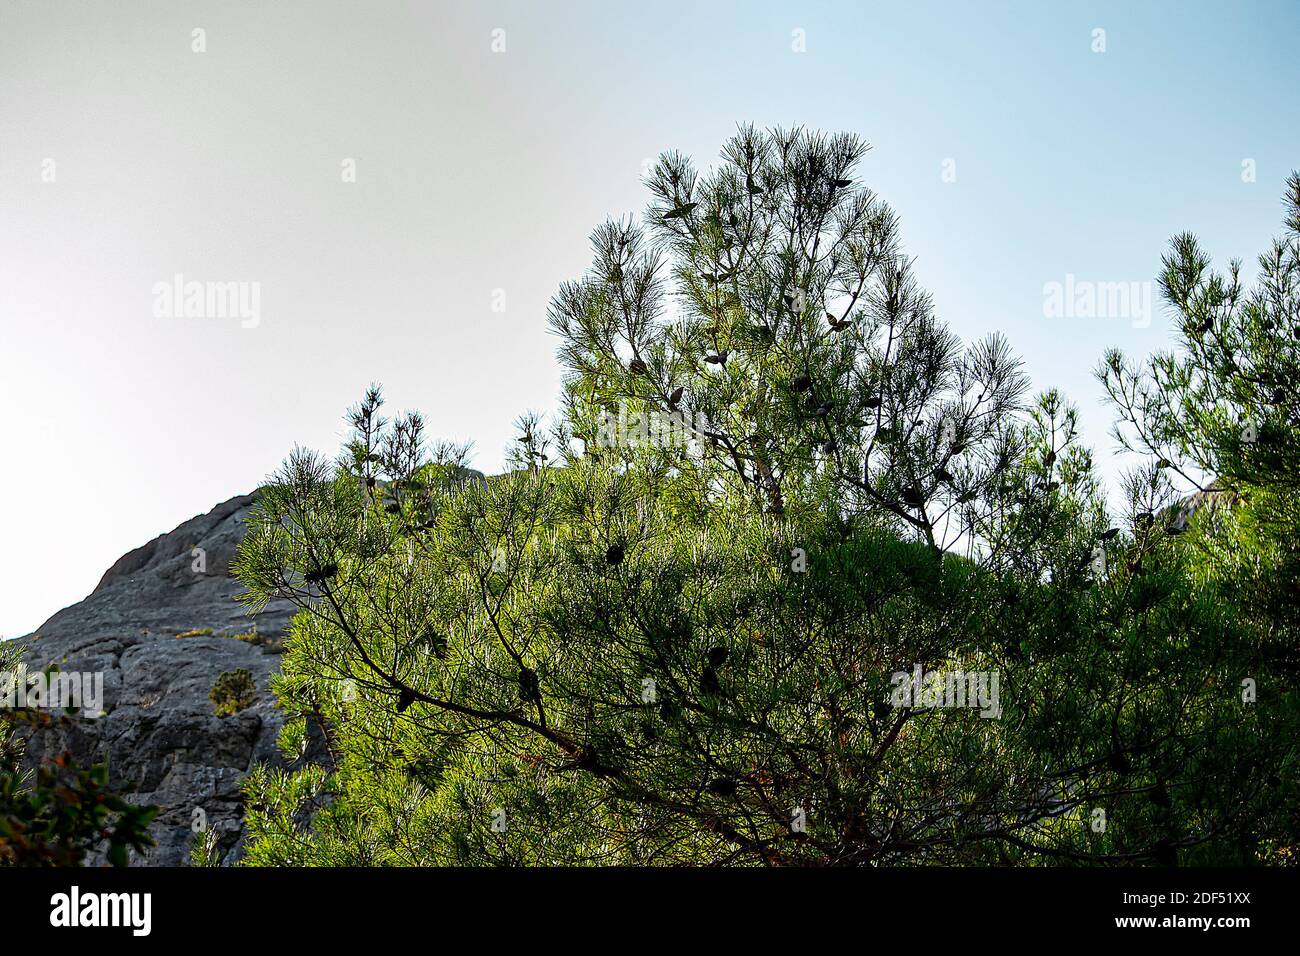 There are bumps in the tree. In the background is a mountain and a bright sky. View from the bottom up. Stock Photo